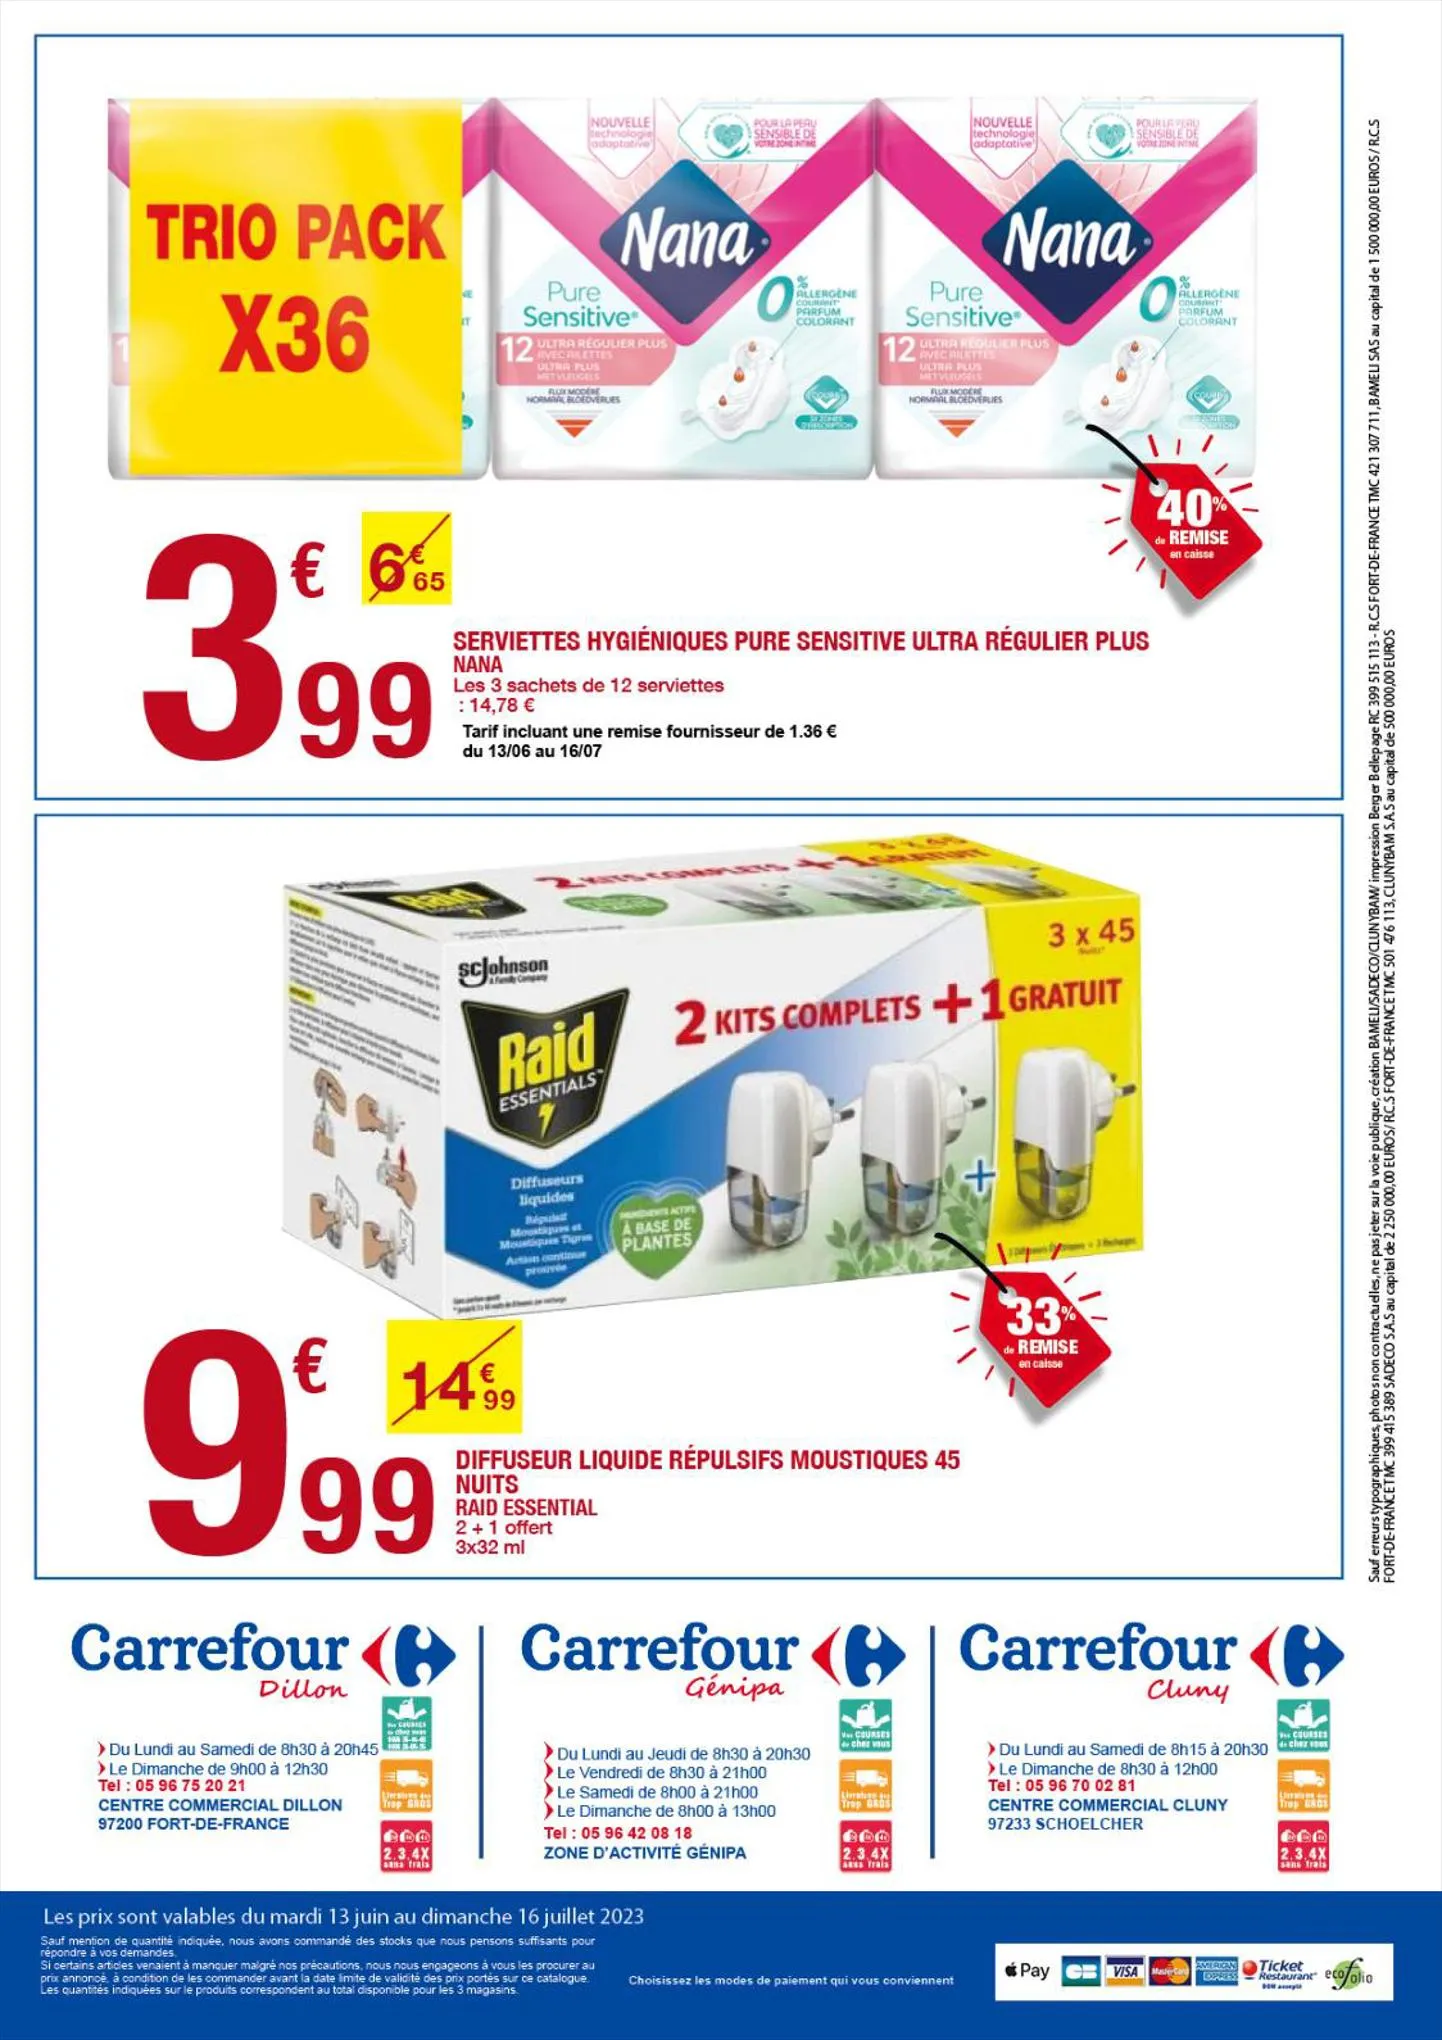 Catalogue Carrefour crf-OP CACI 6316, page 00006